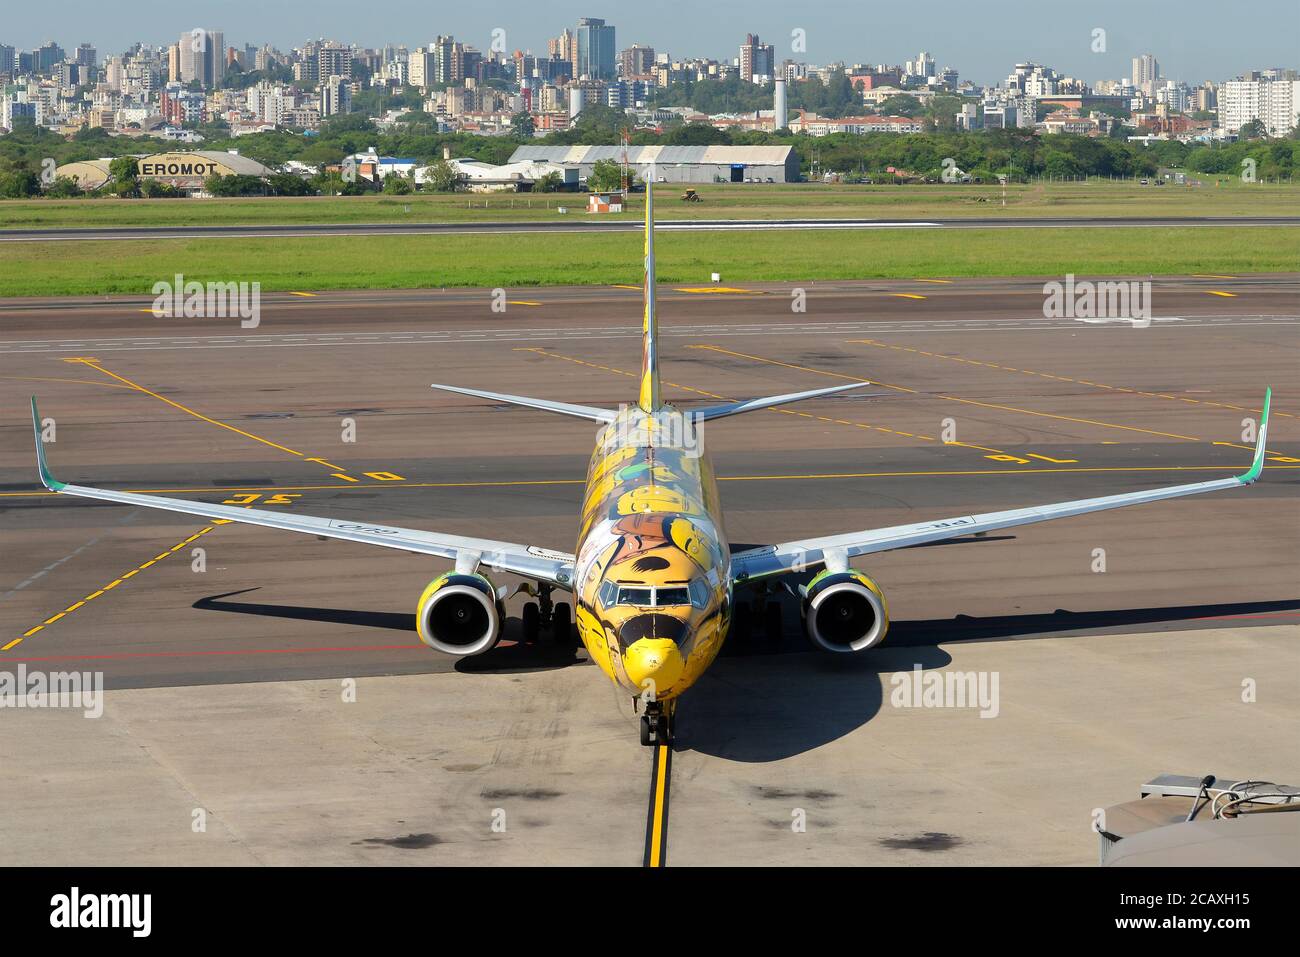 Gol Airlines Boeing 737 with graffiti special livery done by Os Gemeos Brazilian artists. The Twins aircraft paint scheme in Porto Alegre, Brazil. Stock Photo